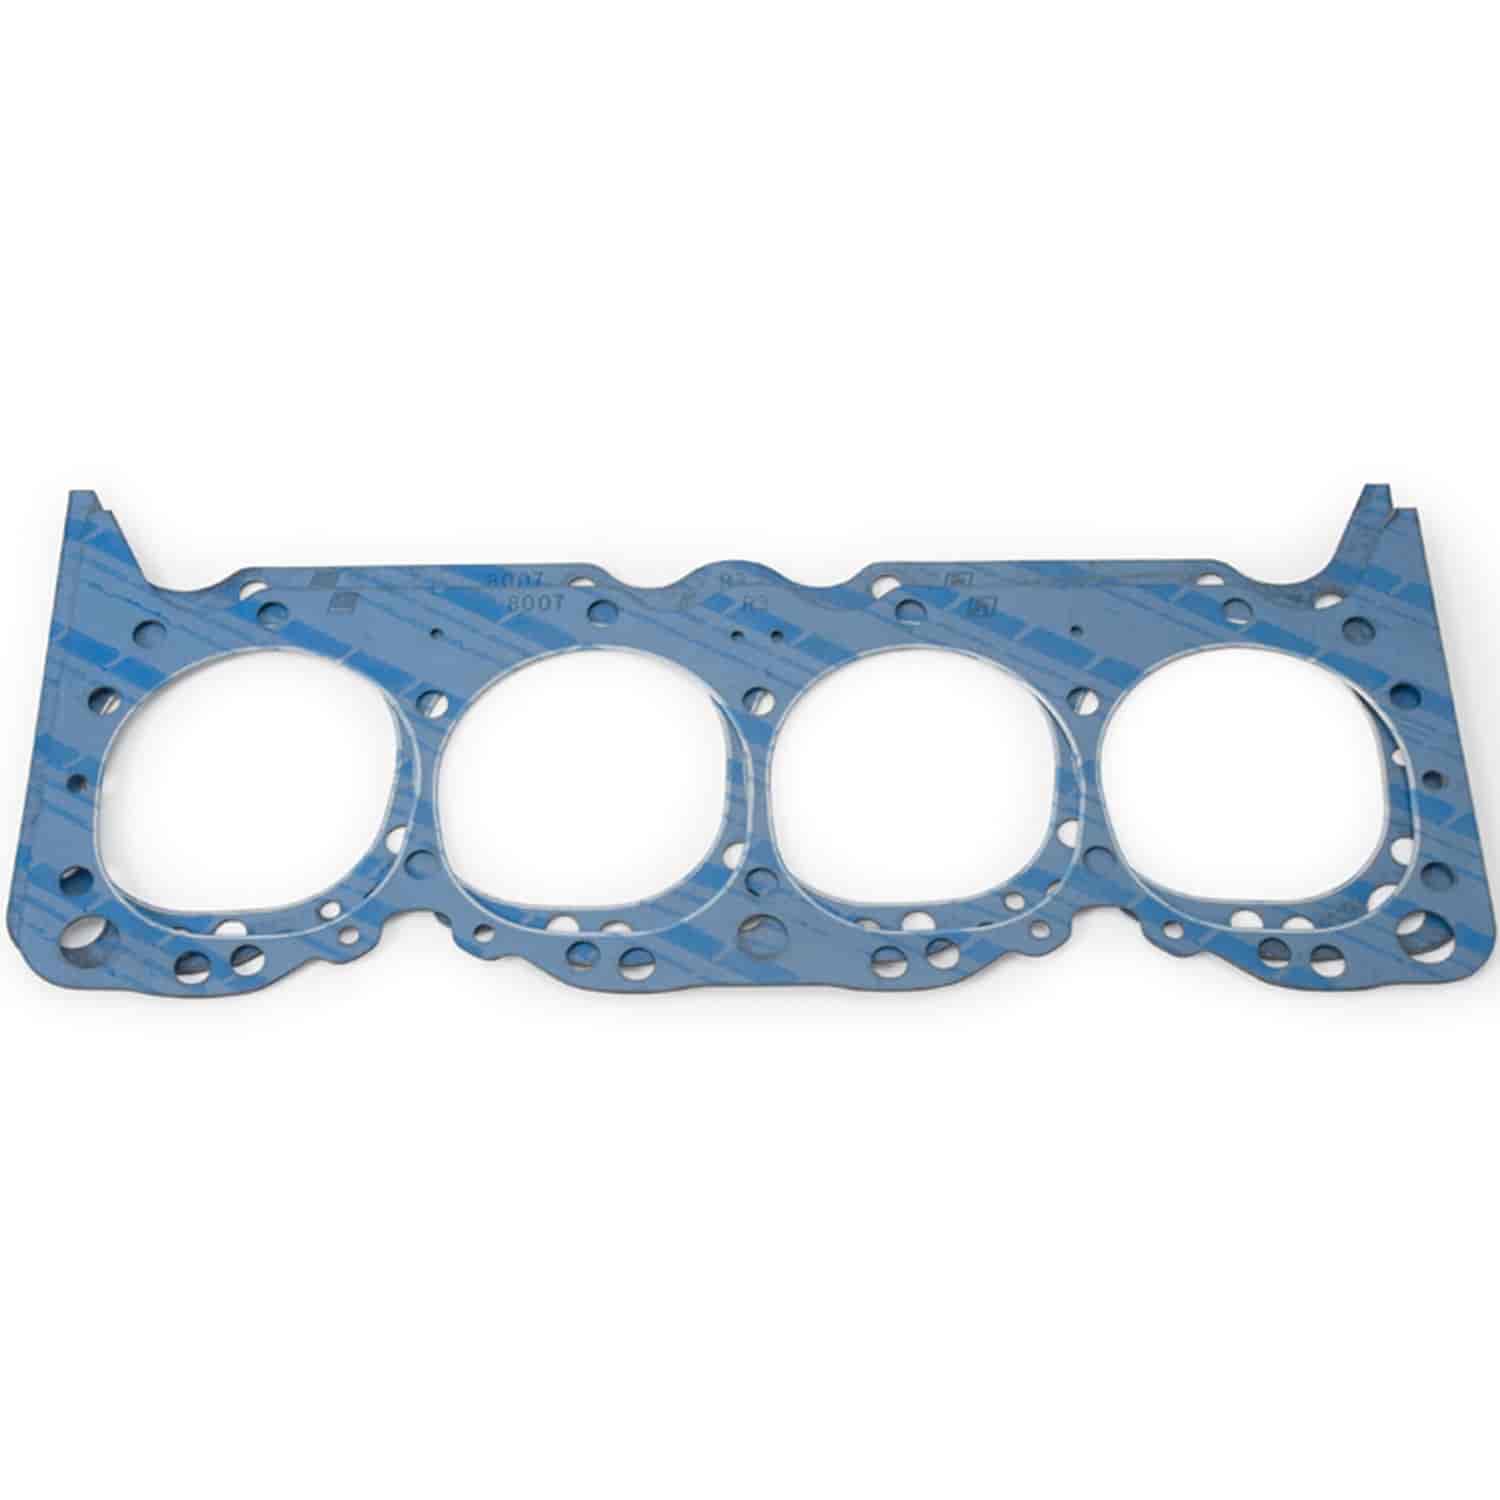 Head Gaskets for Chevy W-Series 348/409